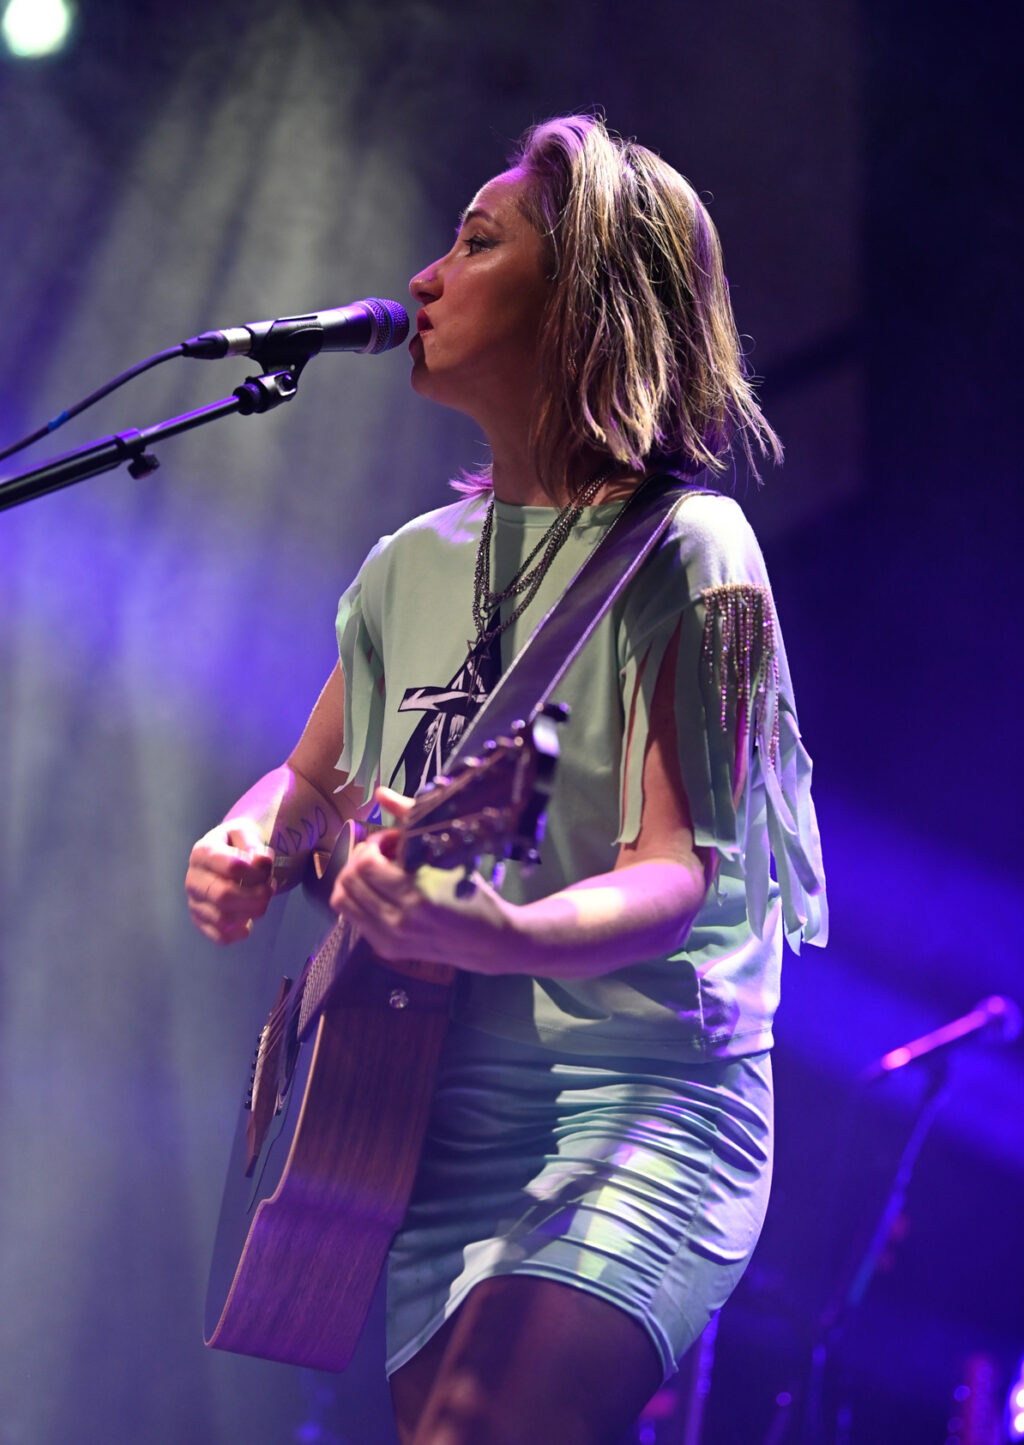 Live Event, Music, Stephen Farrell, Totalntertainment, KT Tunstall, Manchester, Music Photography